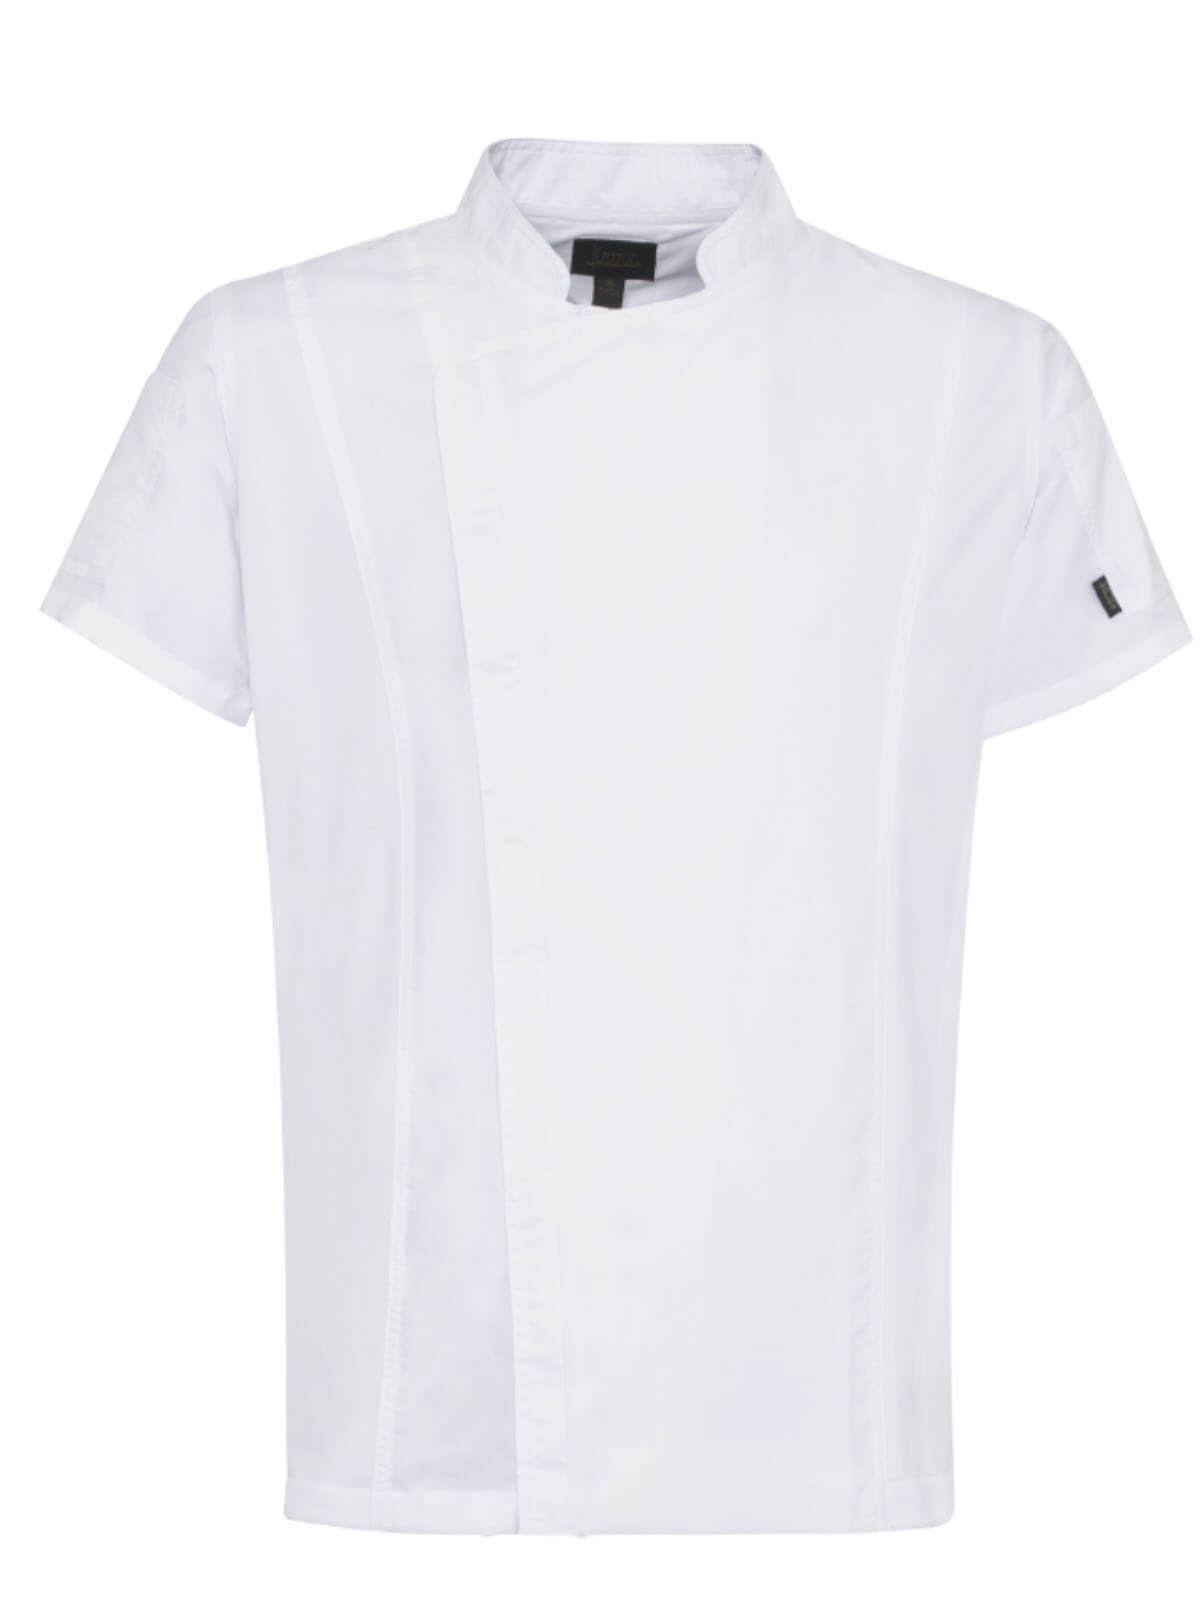 Ventilated Chef Jacket